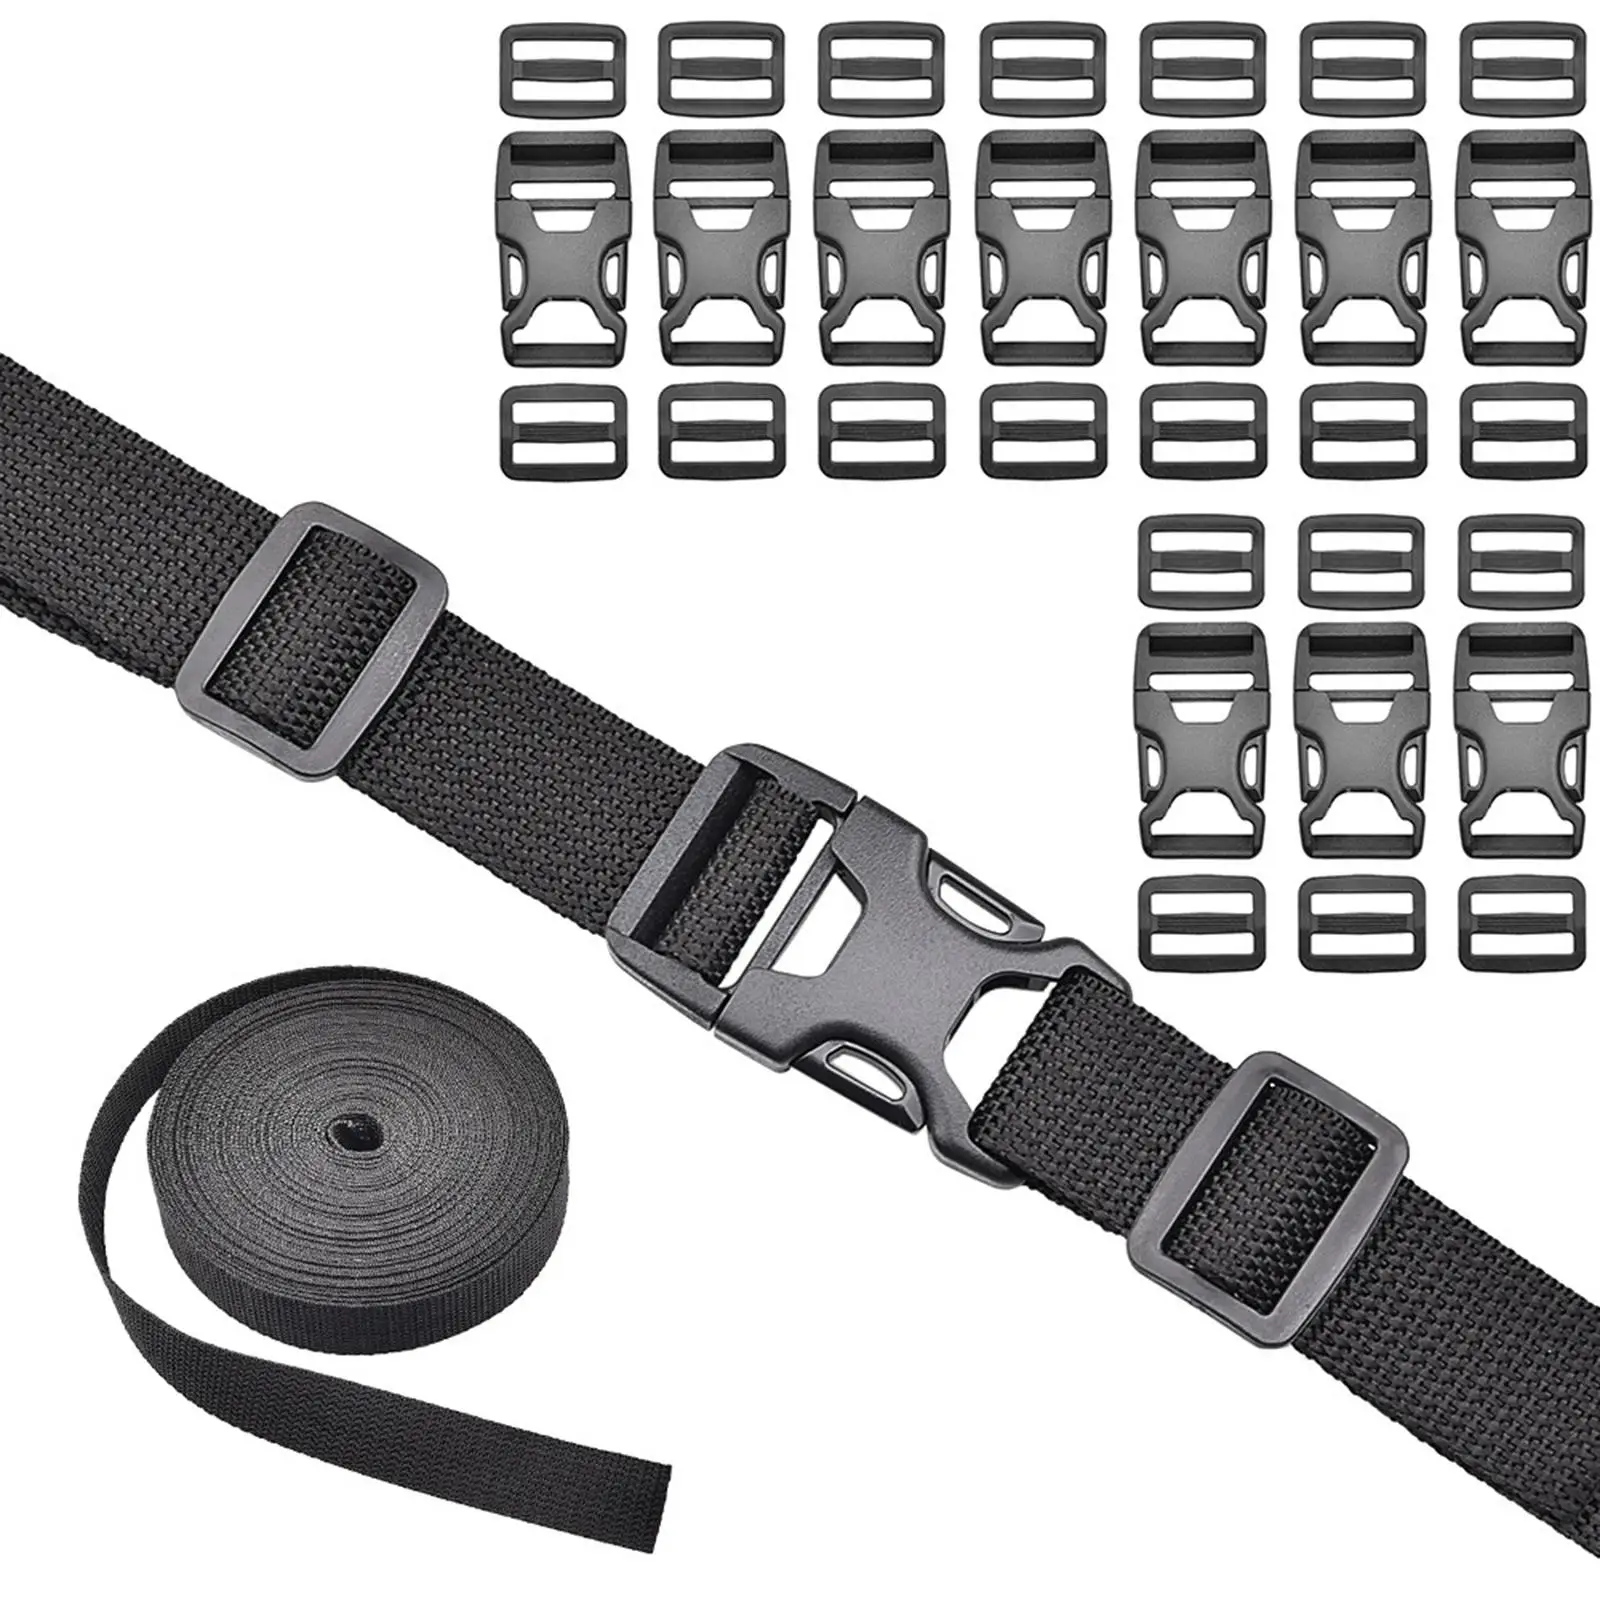 Adjustable Tie Down Straps, Adjustable Lashing Strap Ratchet Straps, Cargo Strap with Buckle for Carrying Various Cargo